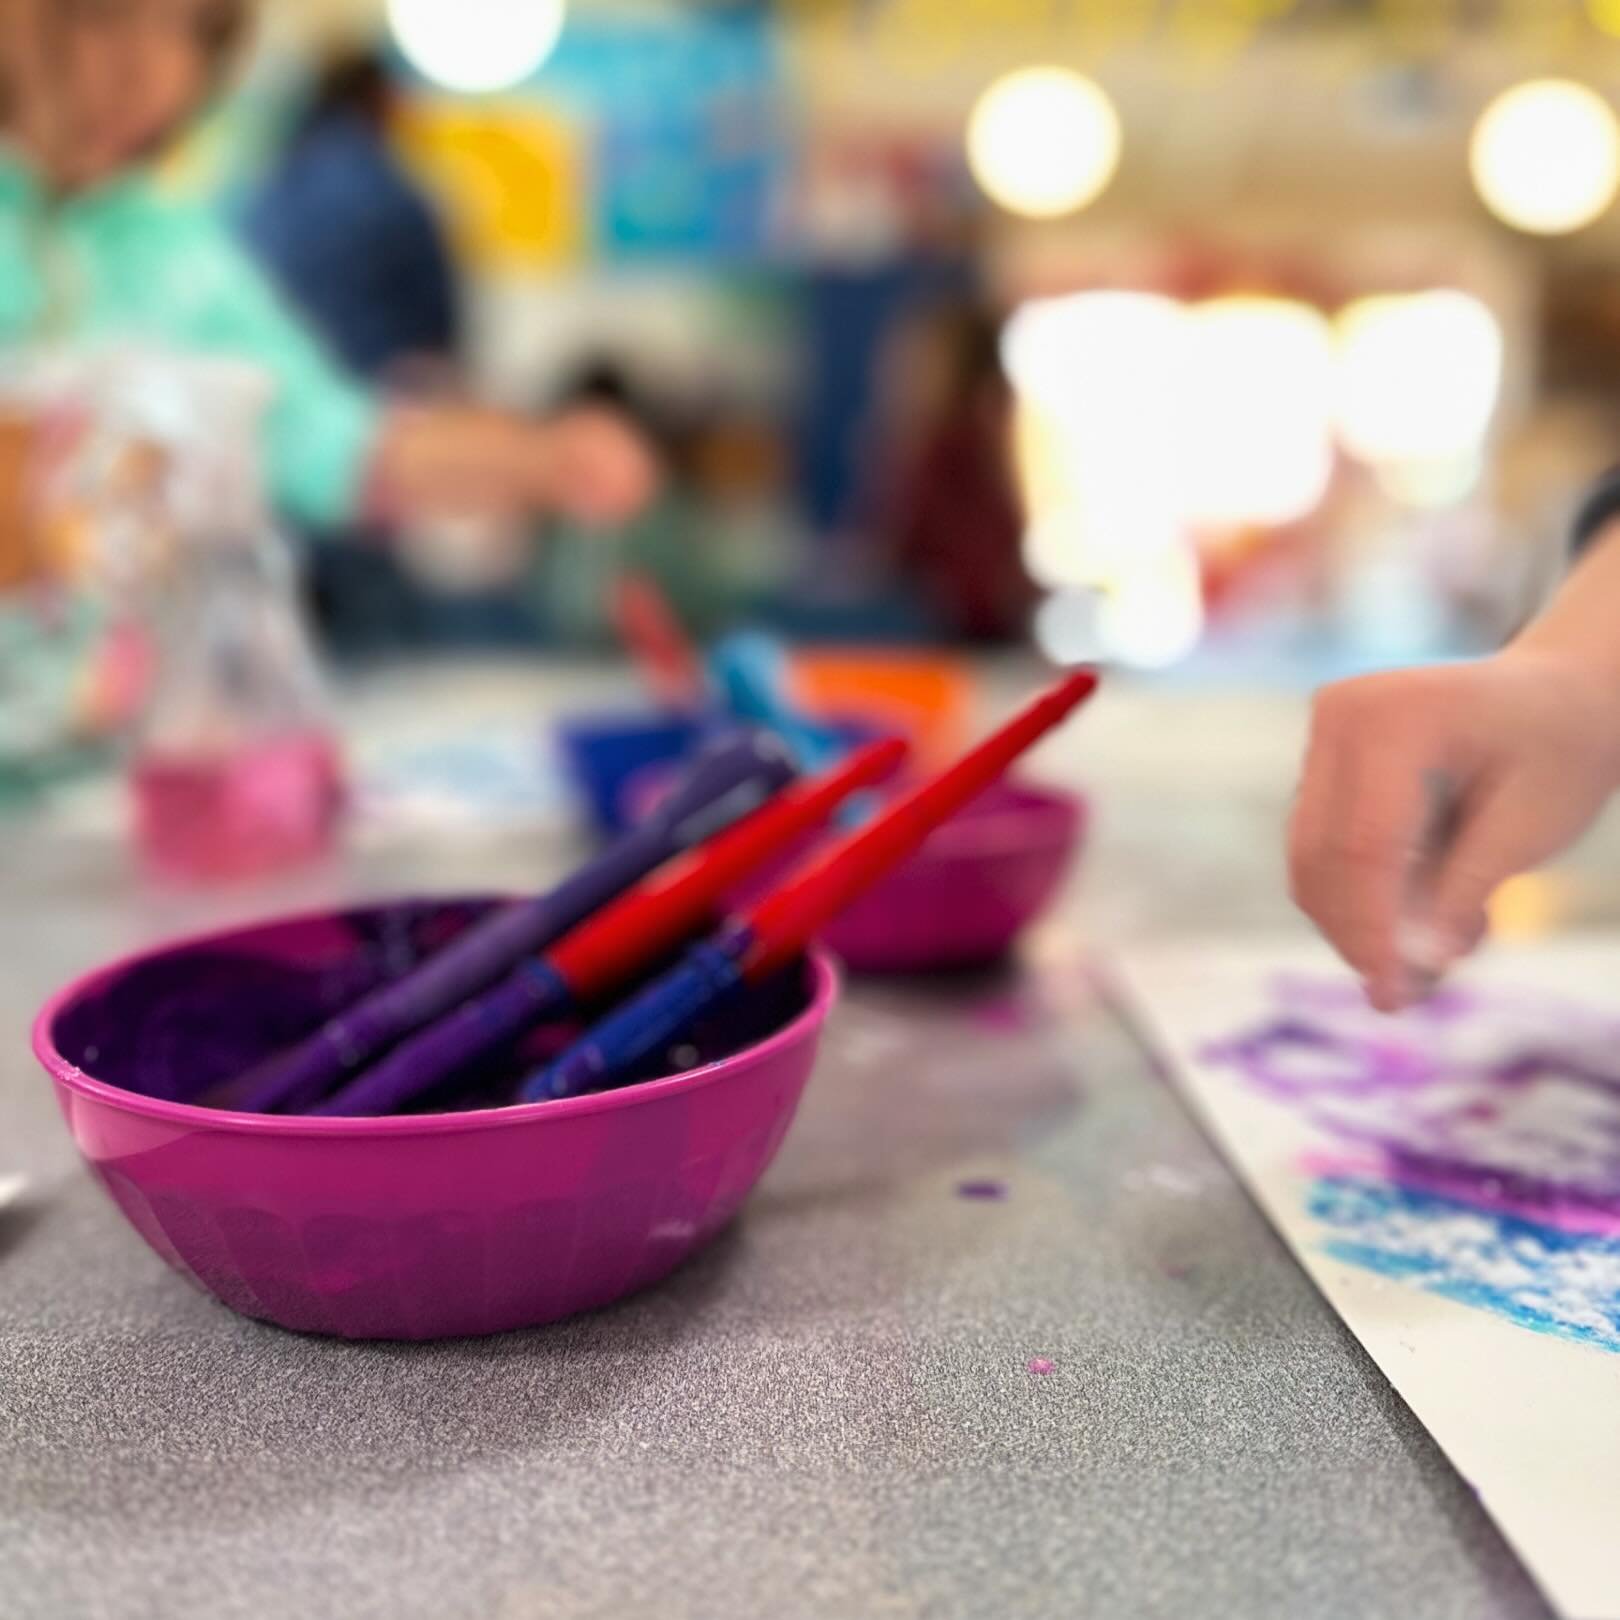 🎨 Let&rsquo;s talk about PROCESS ART! 🌈 It&rsquo;s all about the journey, not just the destination! 

At LGPNS, our little artists explore colors, textures, and shapes with freedom and joy. Every stroke and smudge is a chance for creativity to shin